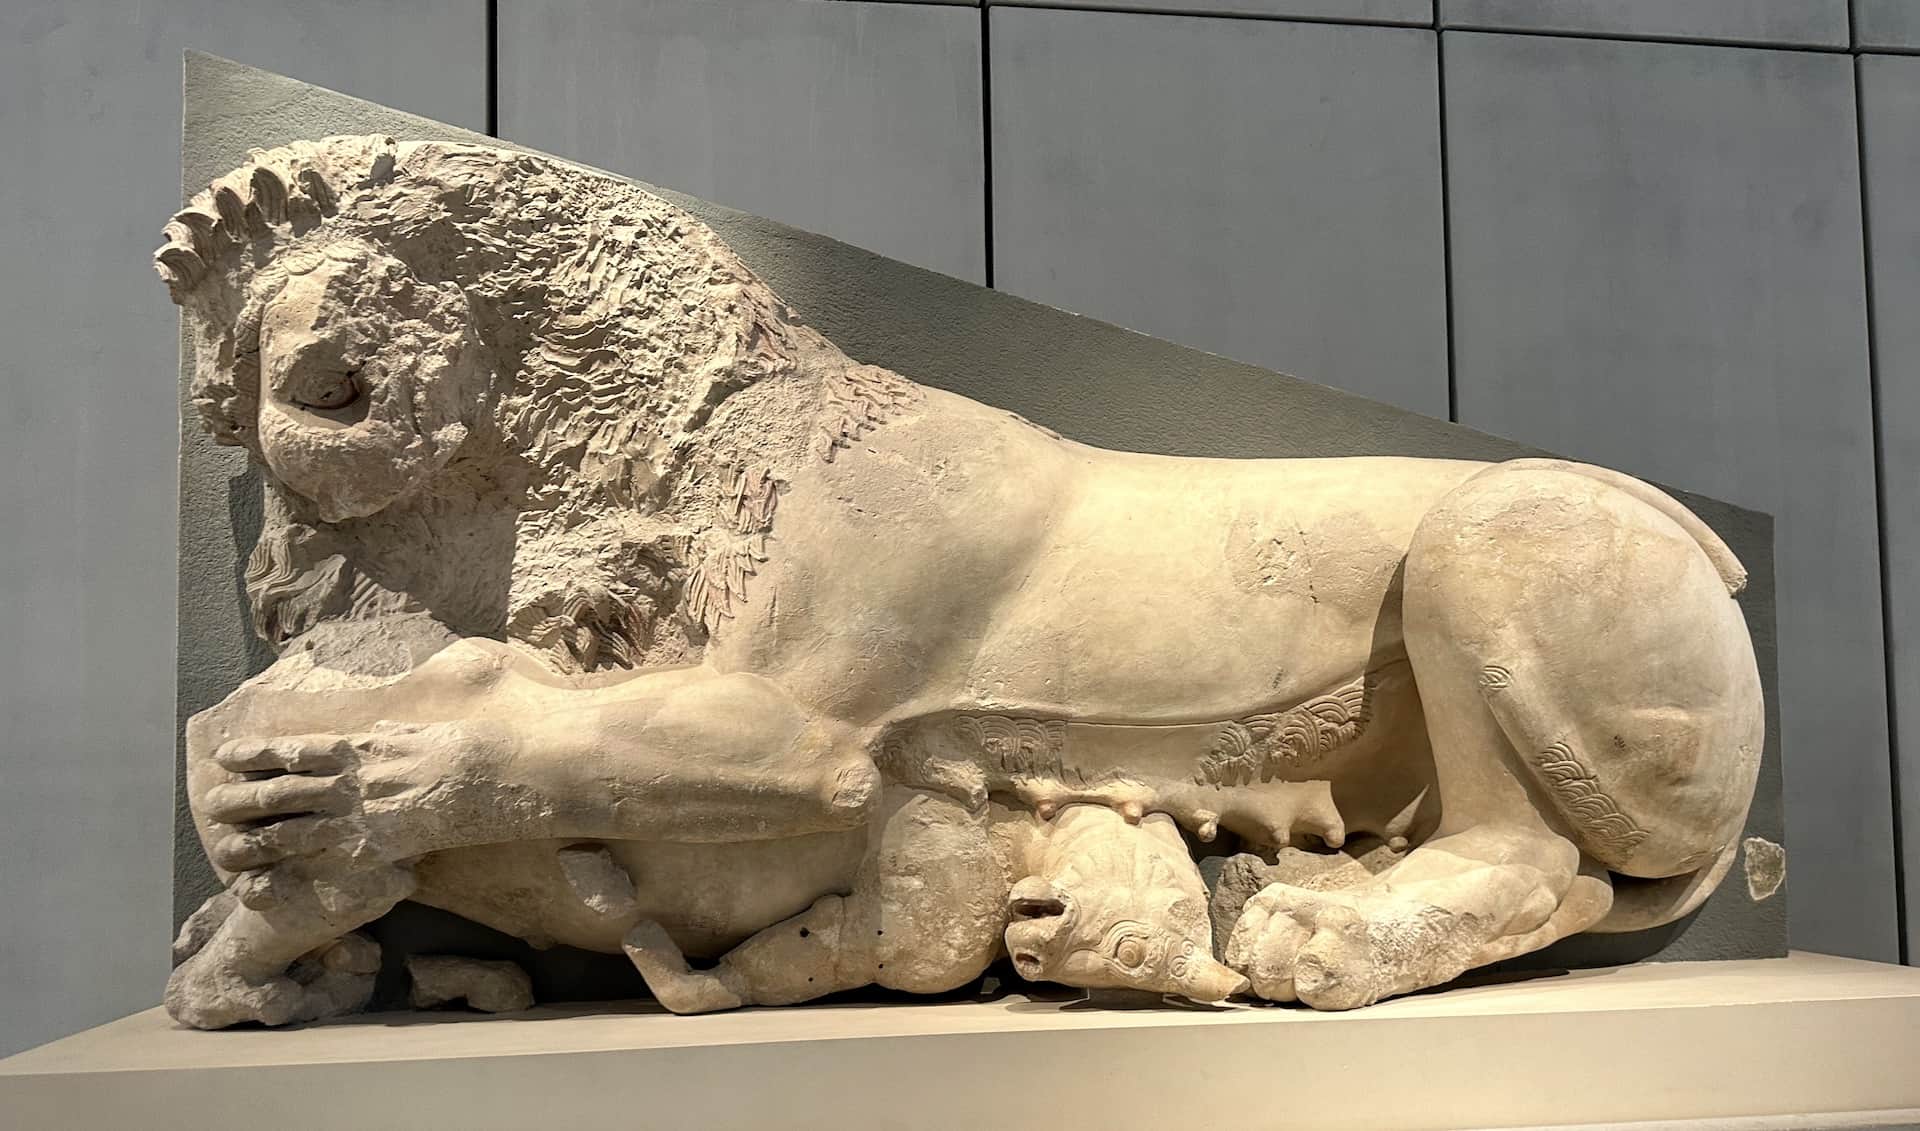 Lioness and calf sculpture; circa 570 BC on the east pediment of the Hekatompedon